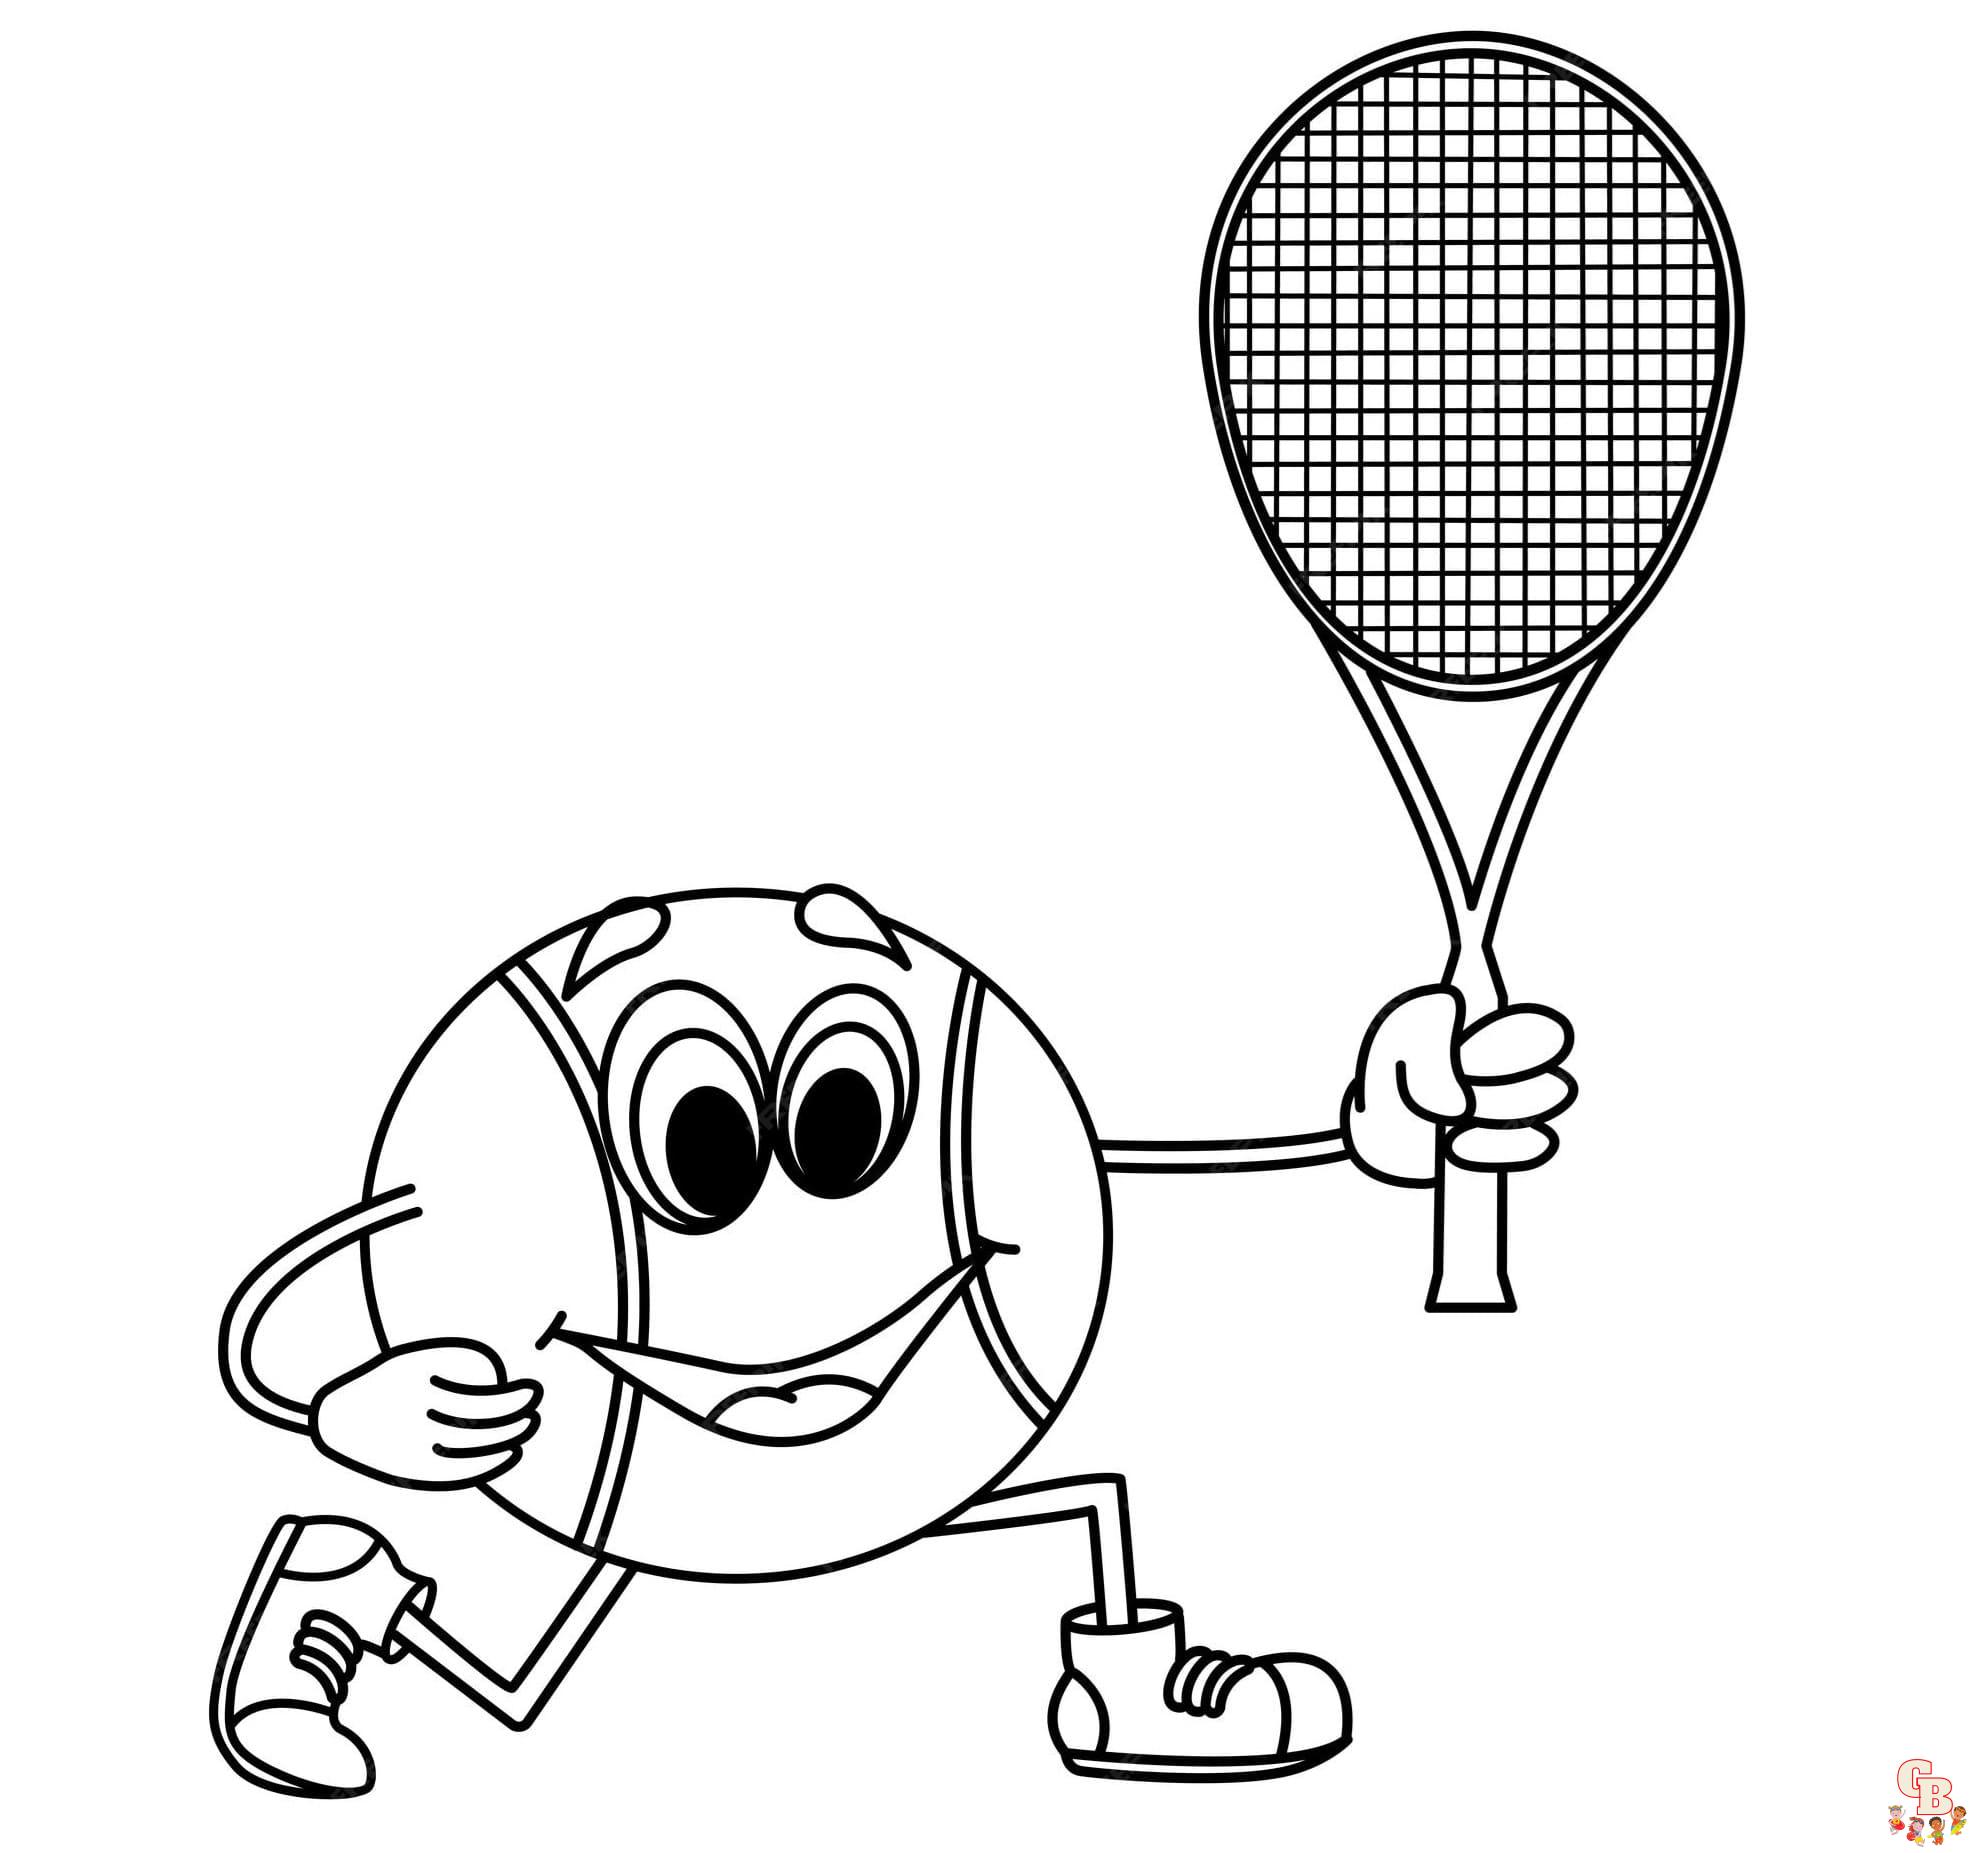 Prinable tennis coloring pages free for kids and adults